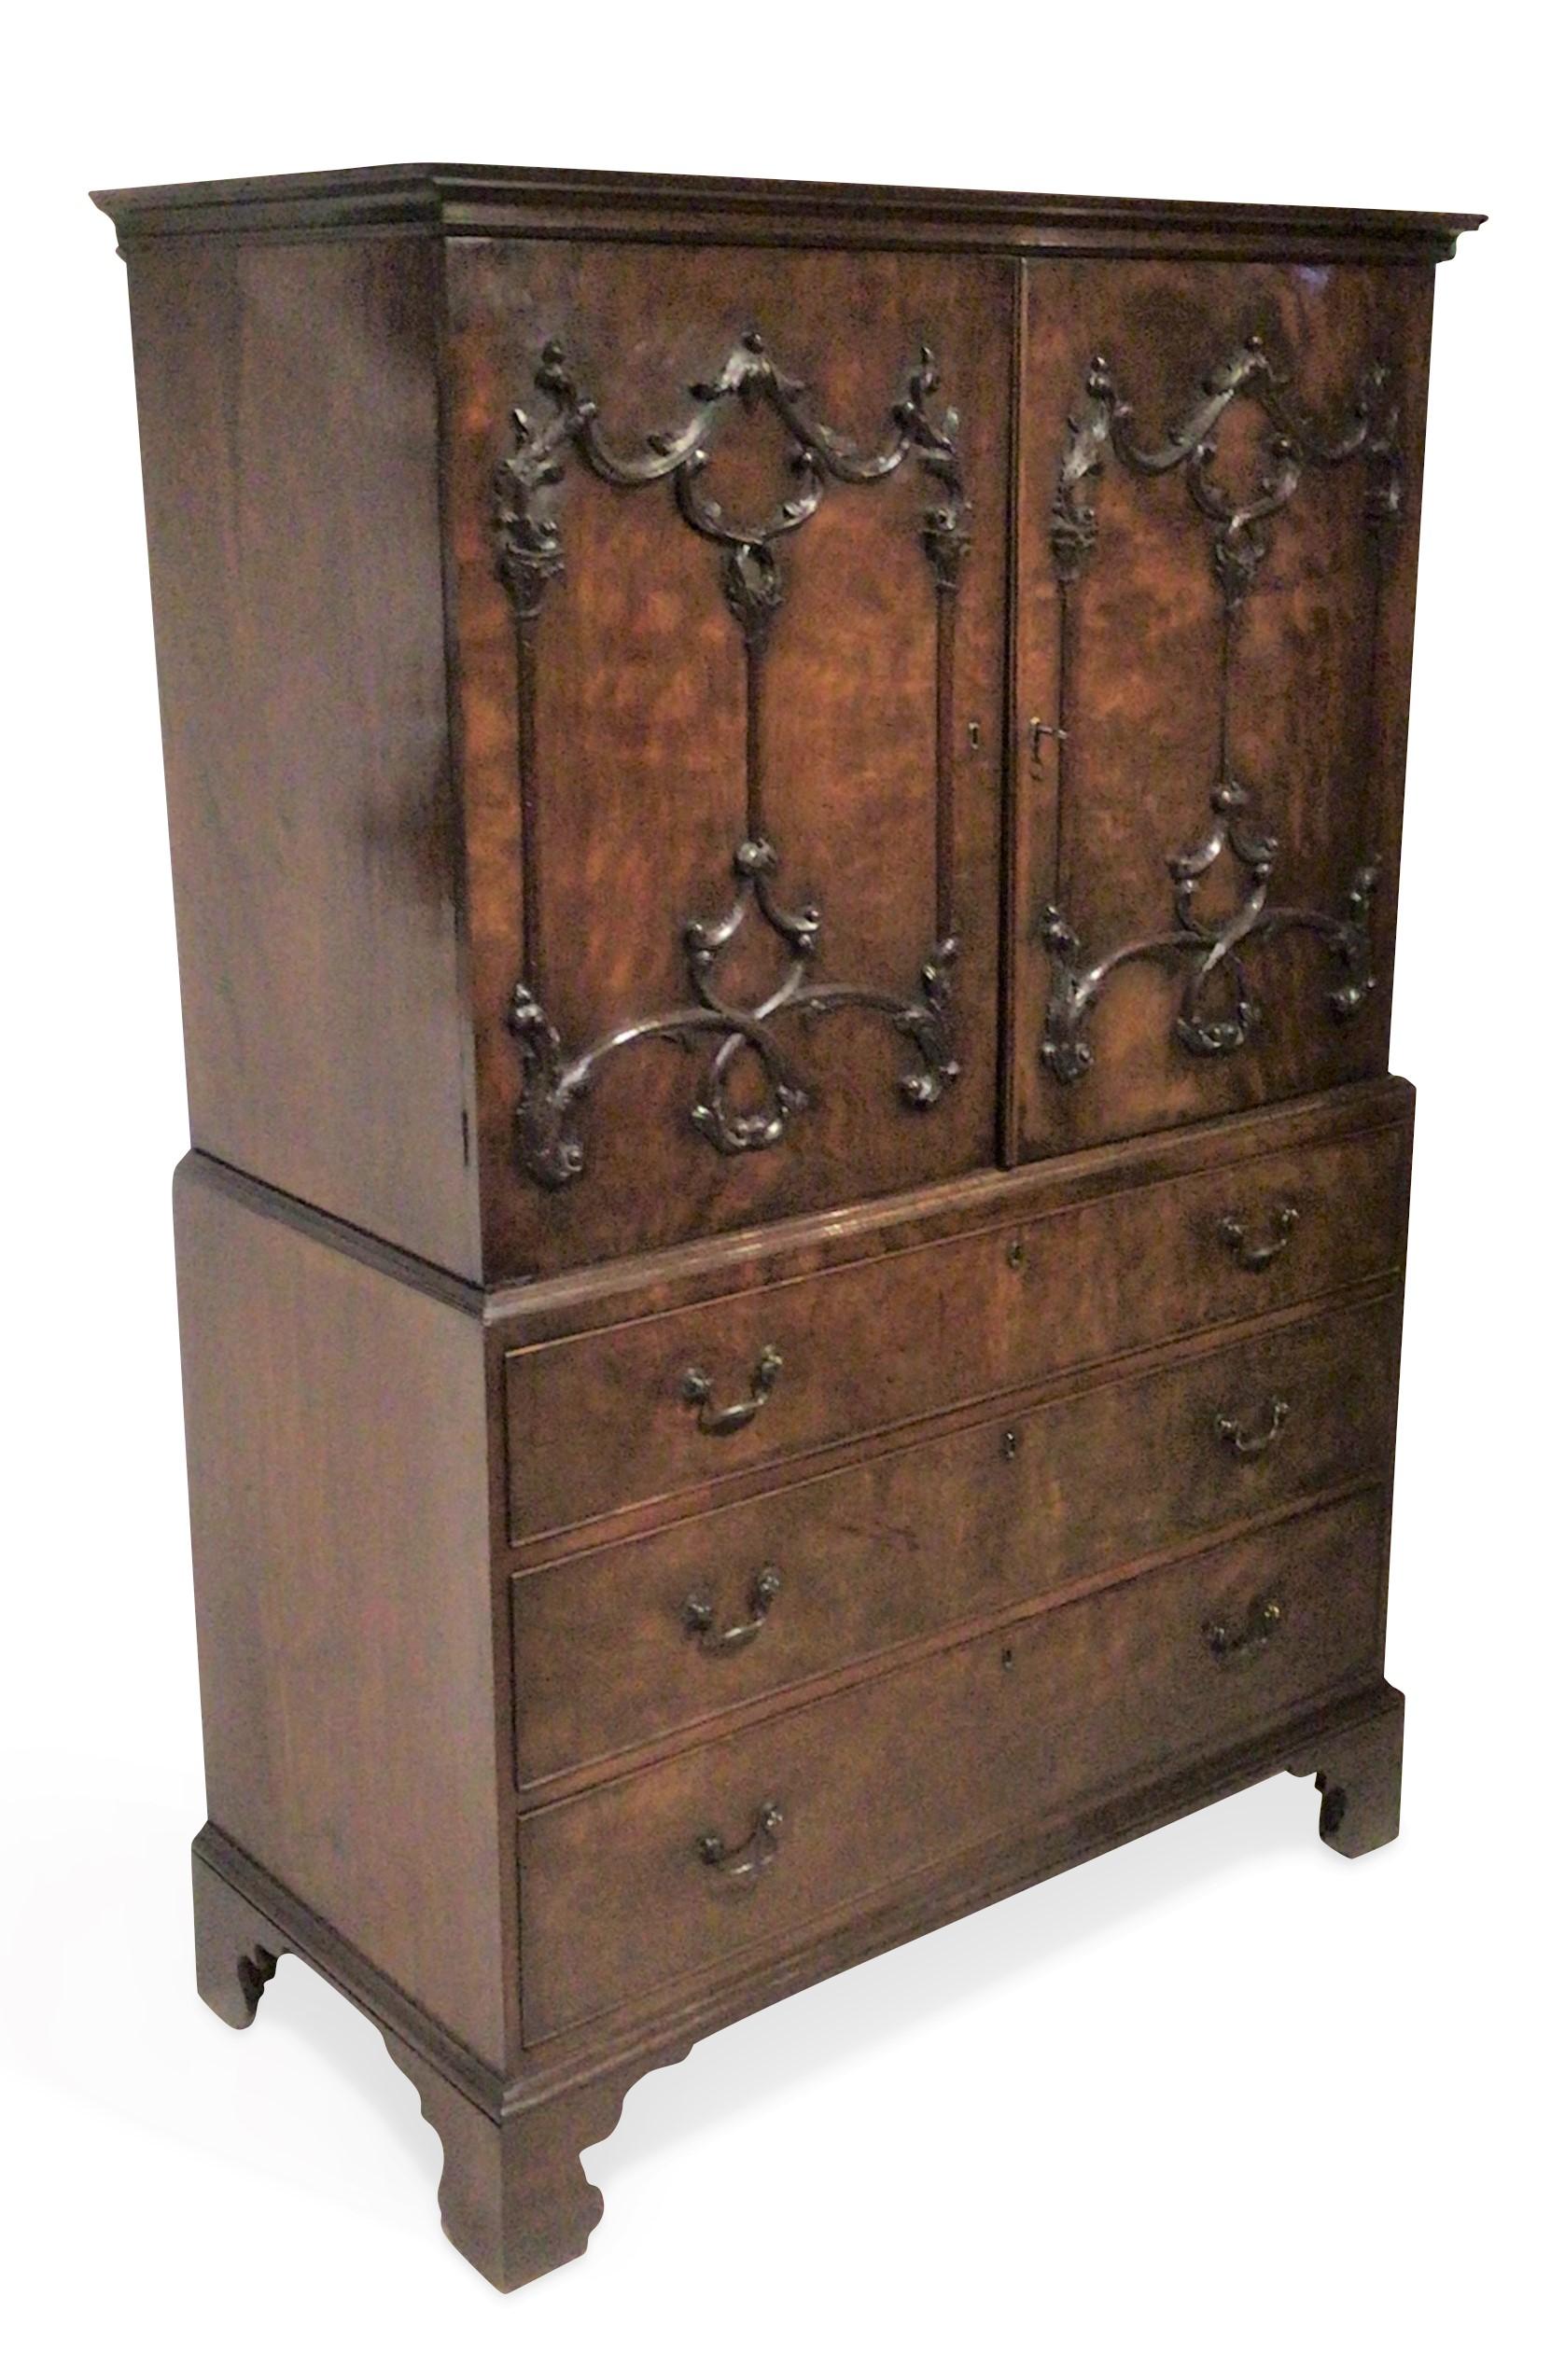 
Home / Stock / 18th Century Mahogany Linen Press
PrevNext


A Fantastic George III mahogany linen press. The doors are adorned with stunning foliate, pilaster and scroll moulded carvings in the rococo taste. 

The interior retains its original